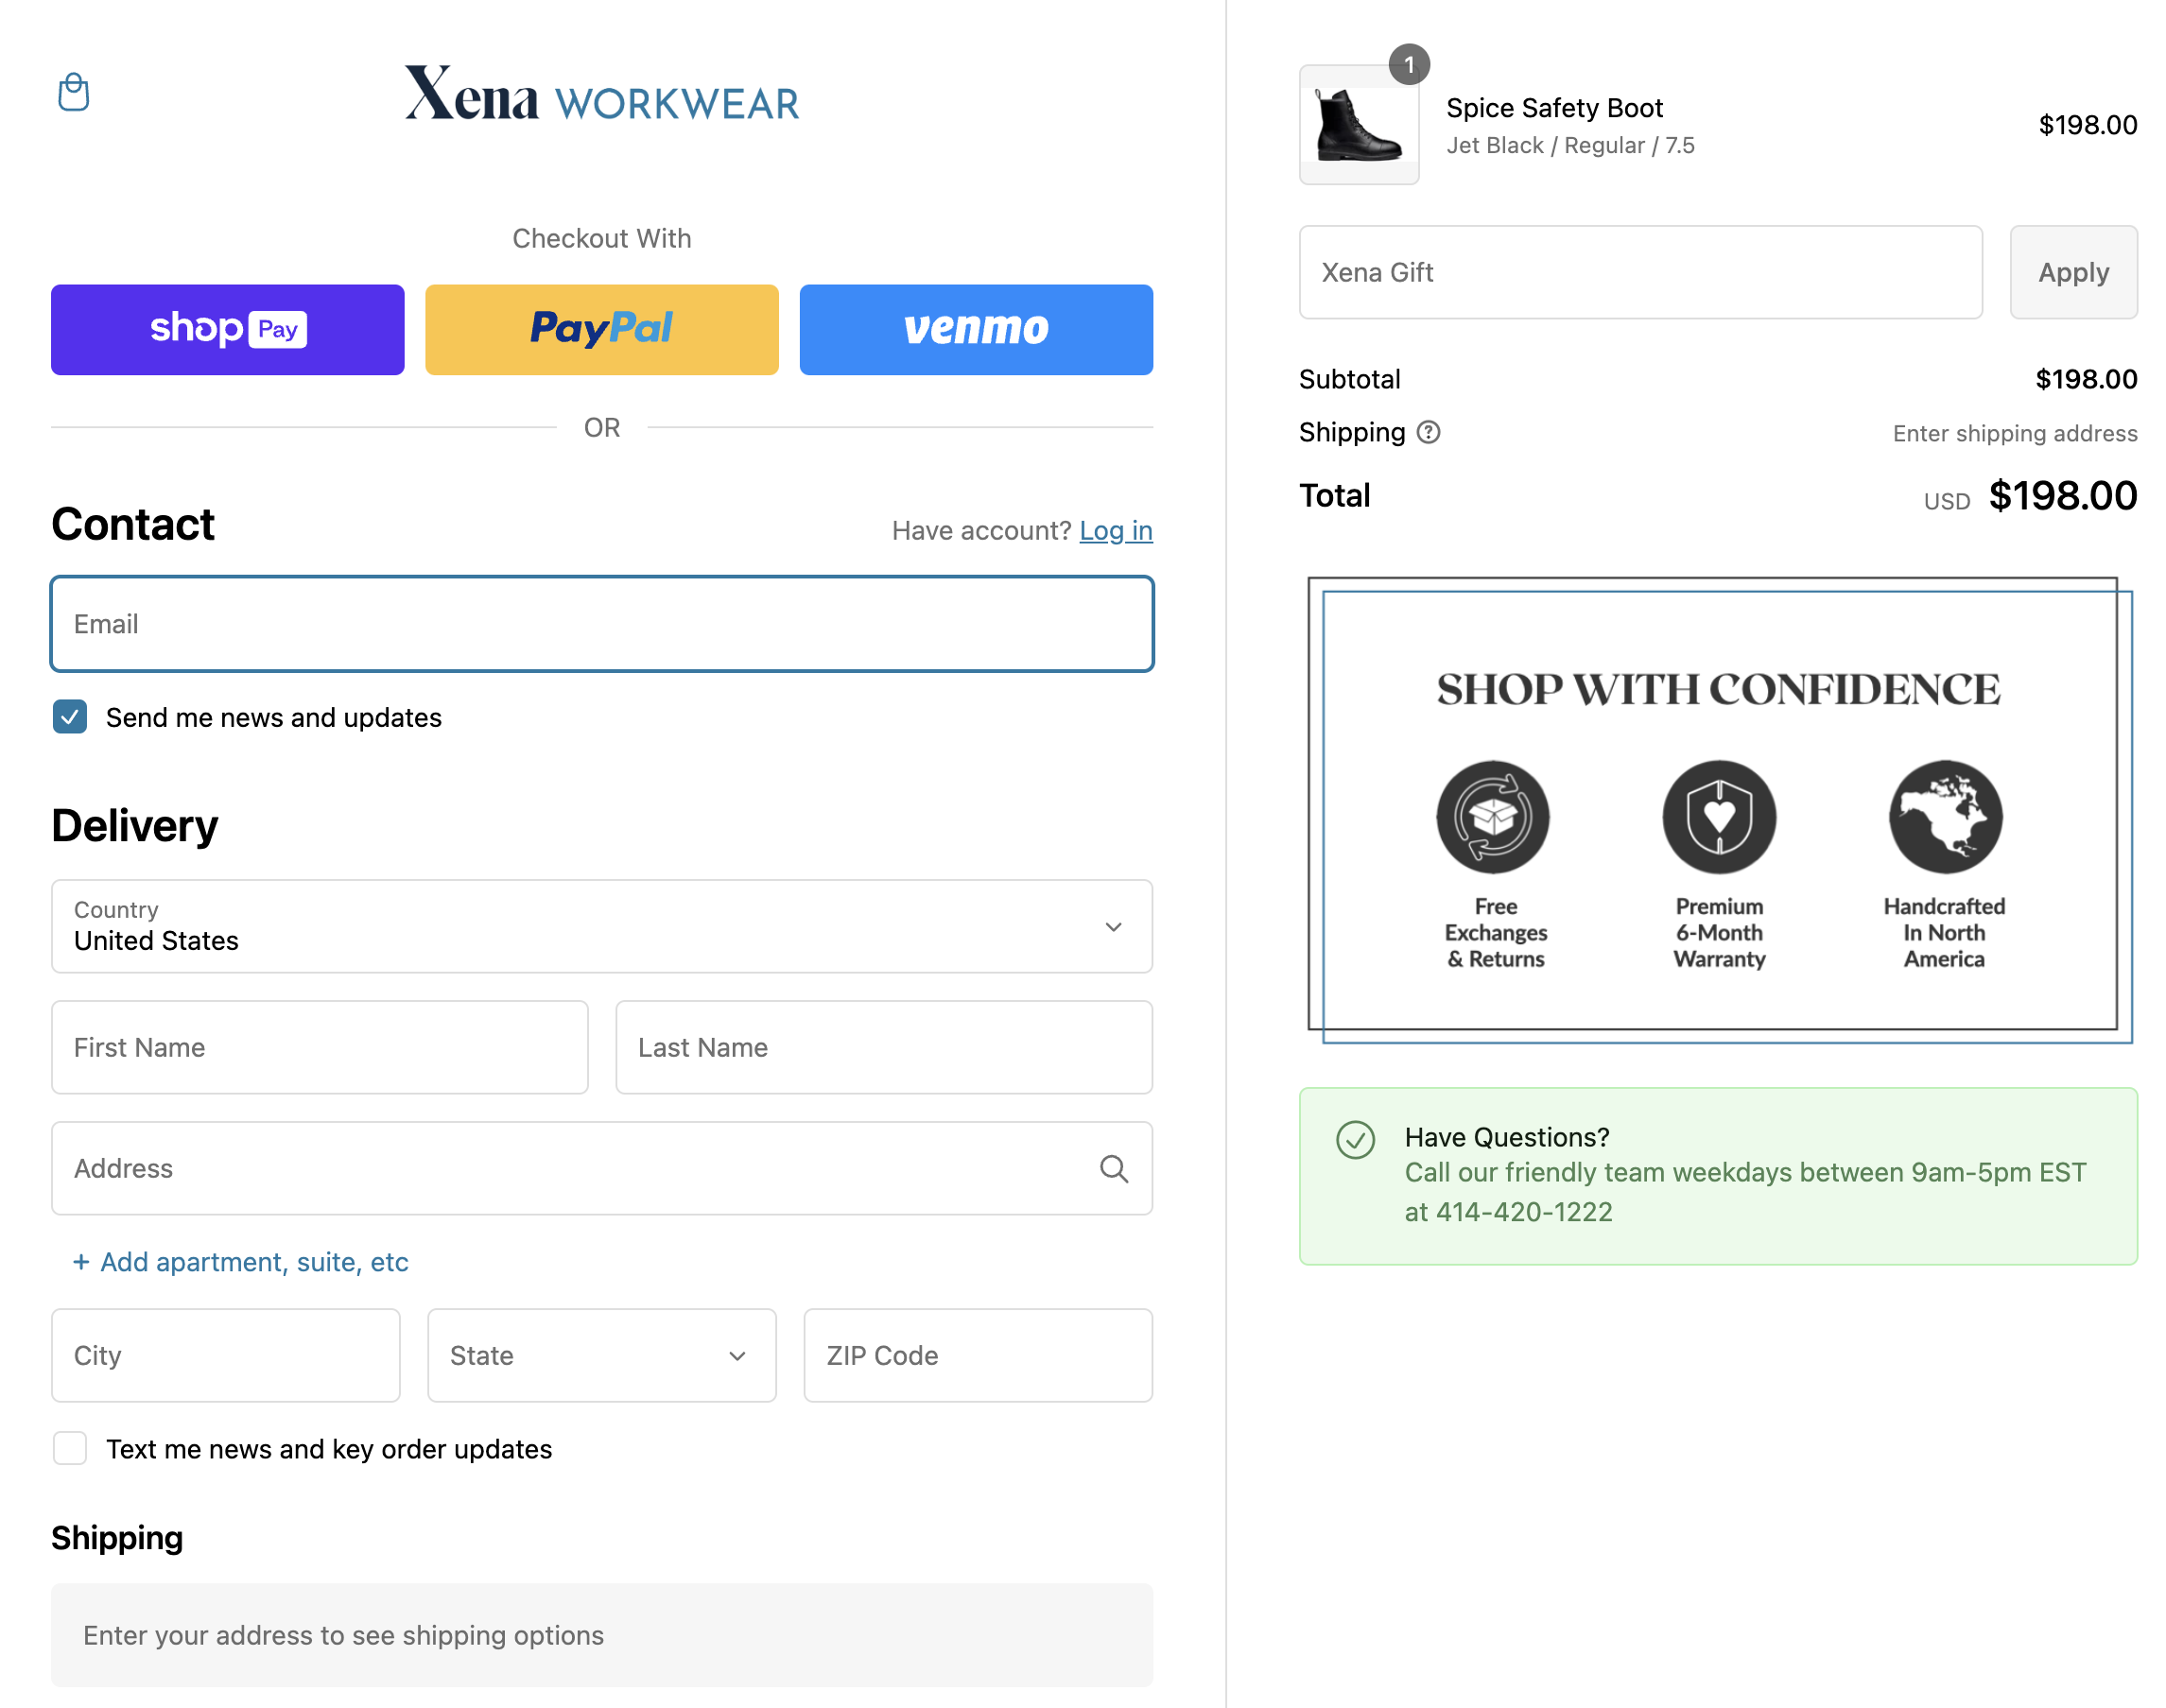 ecommerce website features checkout with paypal shop venmo - 29 Must-Have Features For Ecommerce Websites